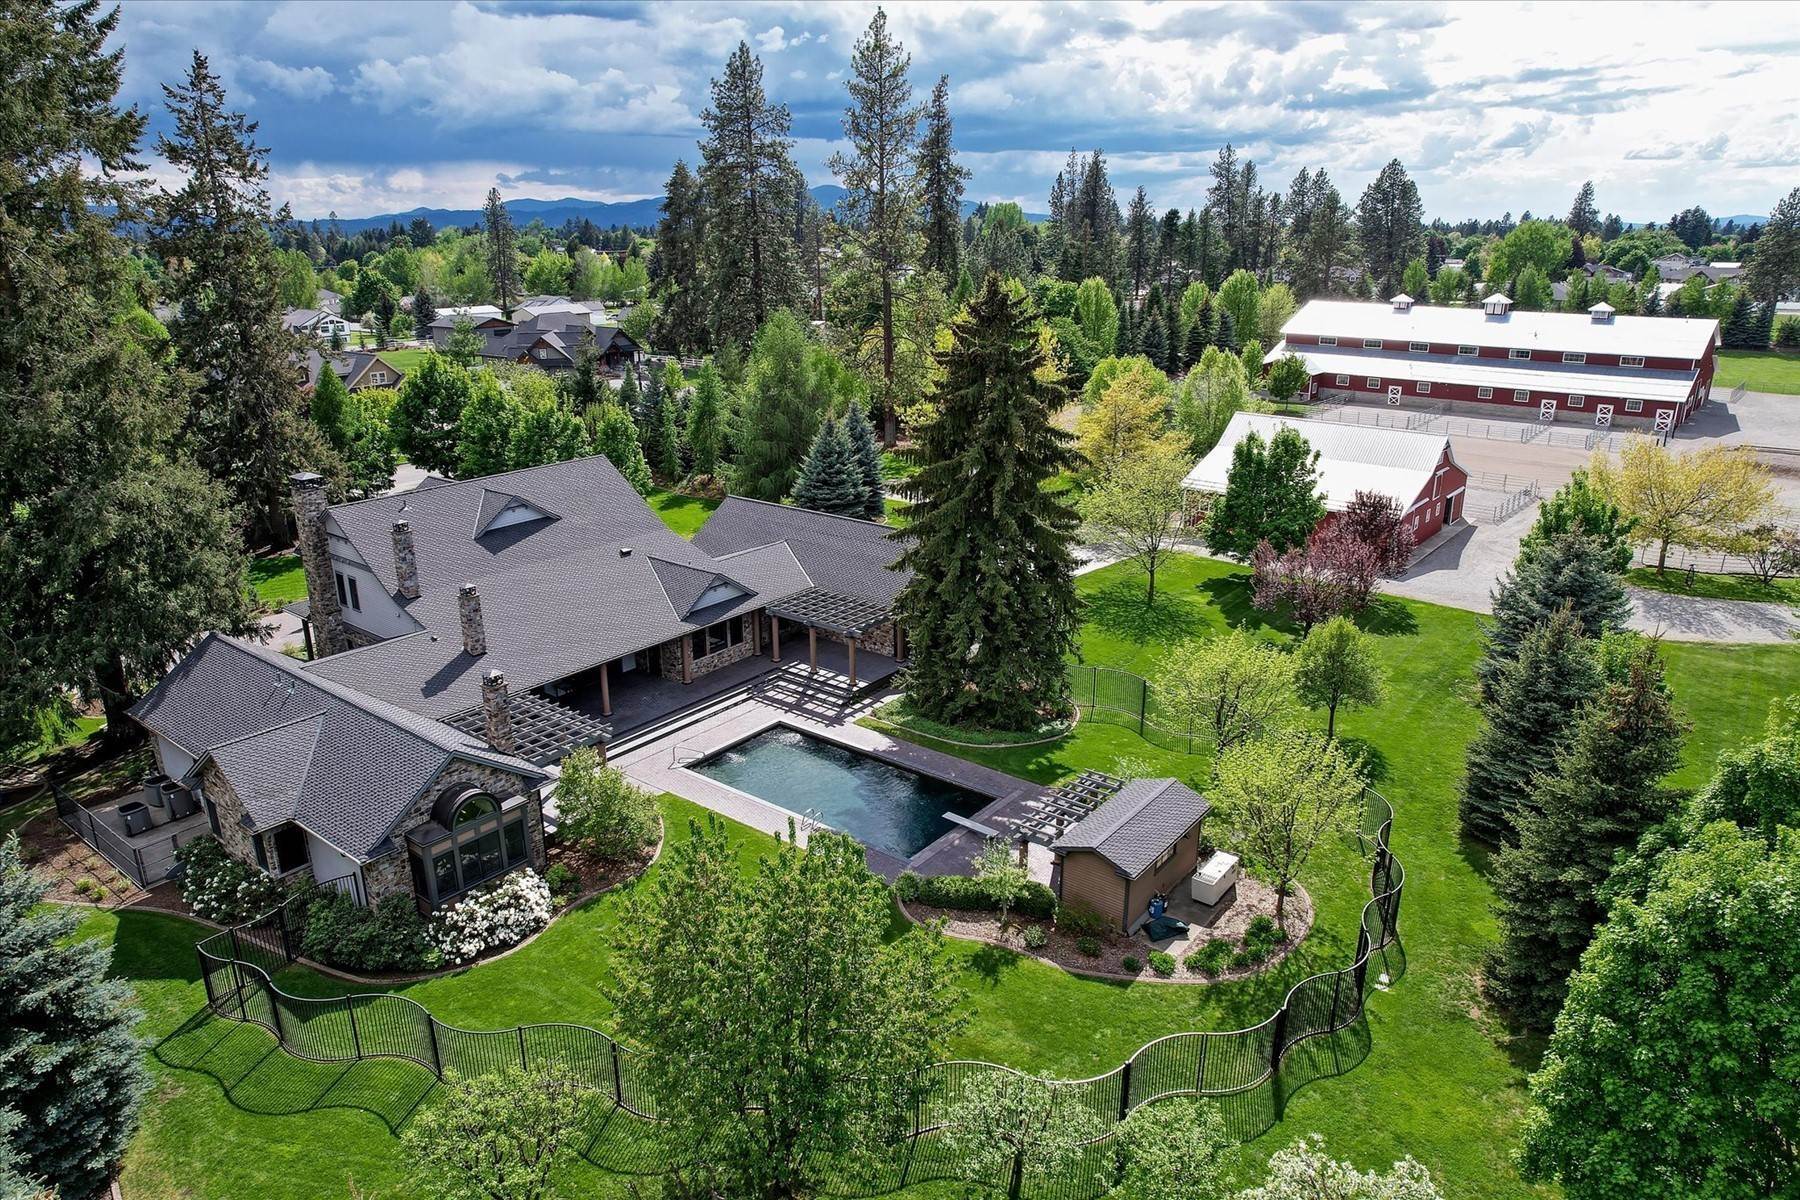 Property for Sale at Exquisite Equestrian Property in Town 1345 & 1221 Lacey Ave Hayden, Idaho 83835 United States